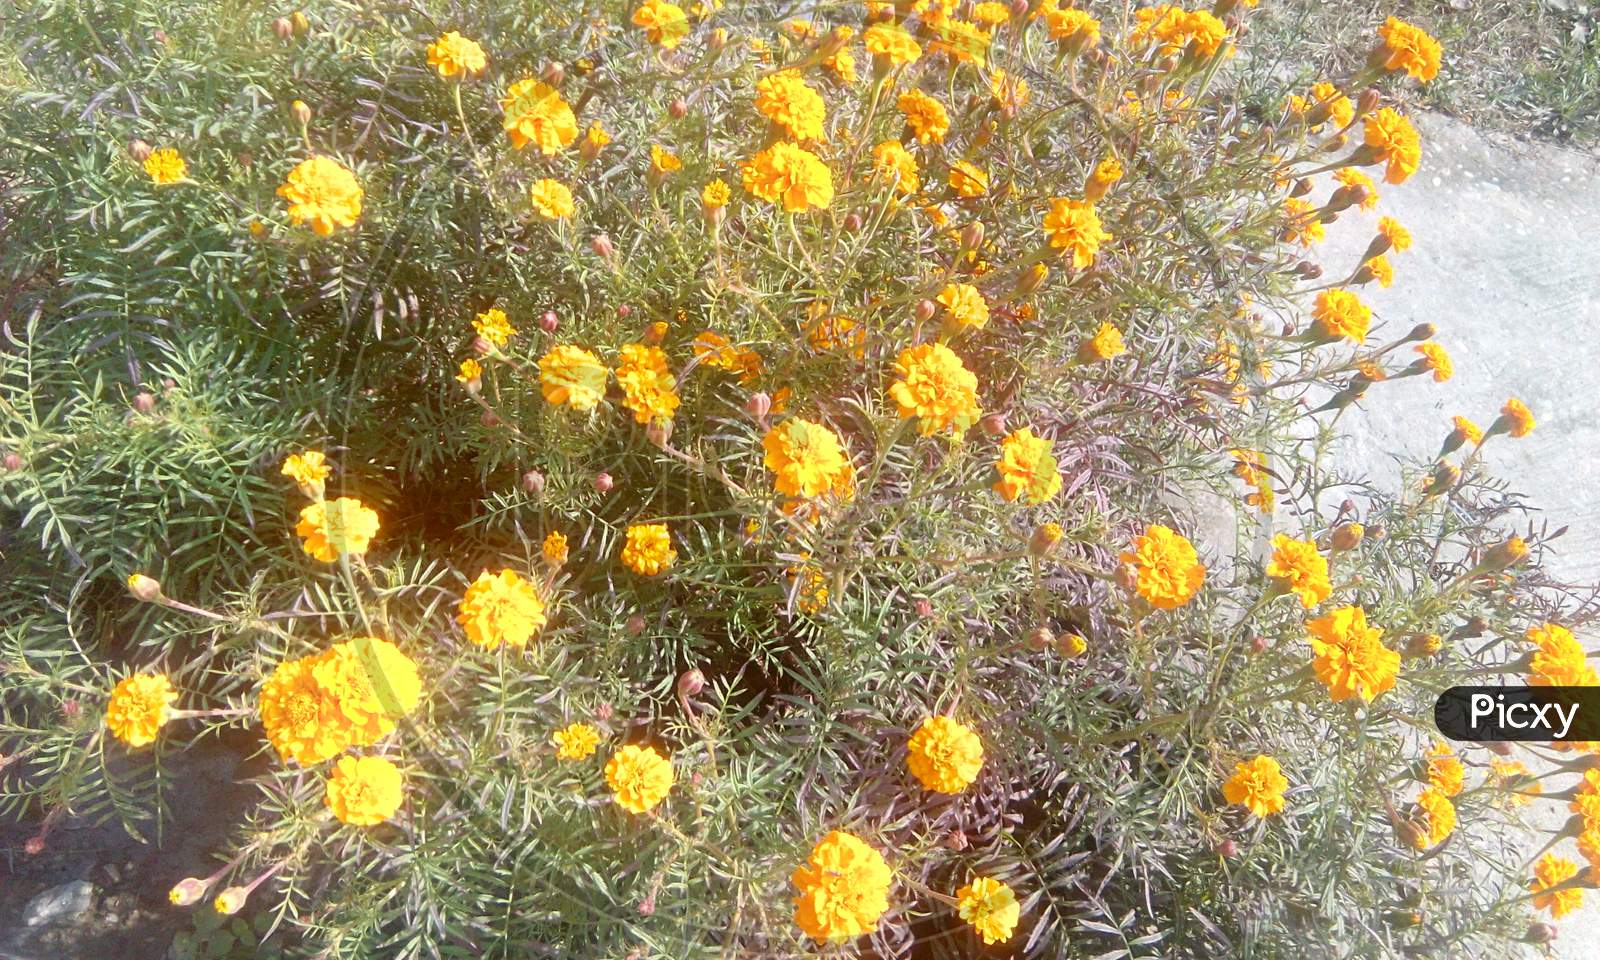 Yellow Marie Gold Flowers blooming on Plants